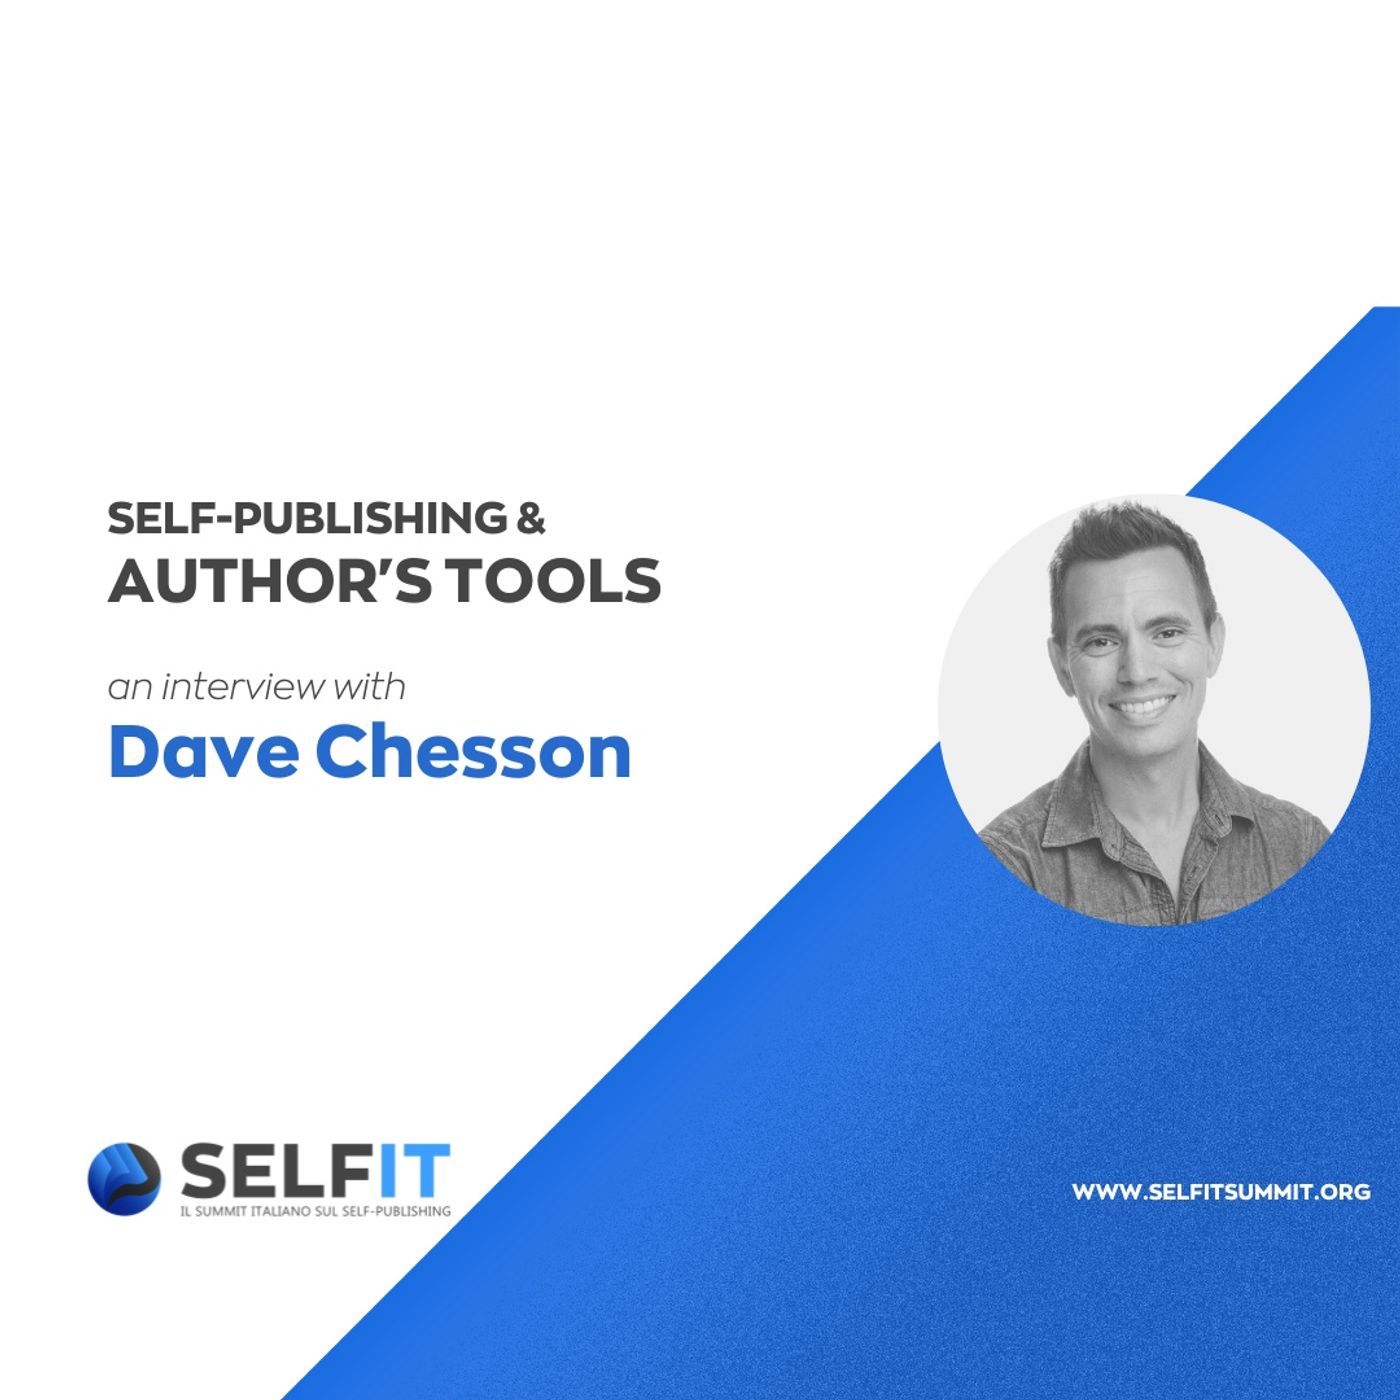 Selfit Summit - Self-Publishing and Author's Tools - An interview with Dave Chesson (English)